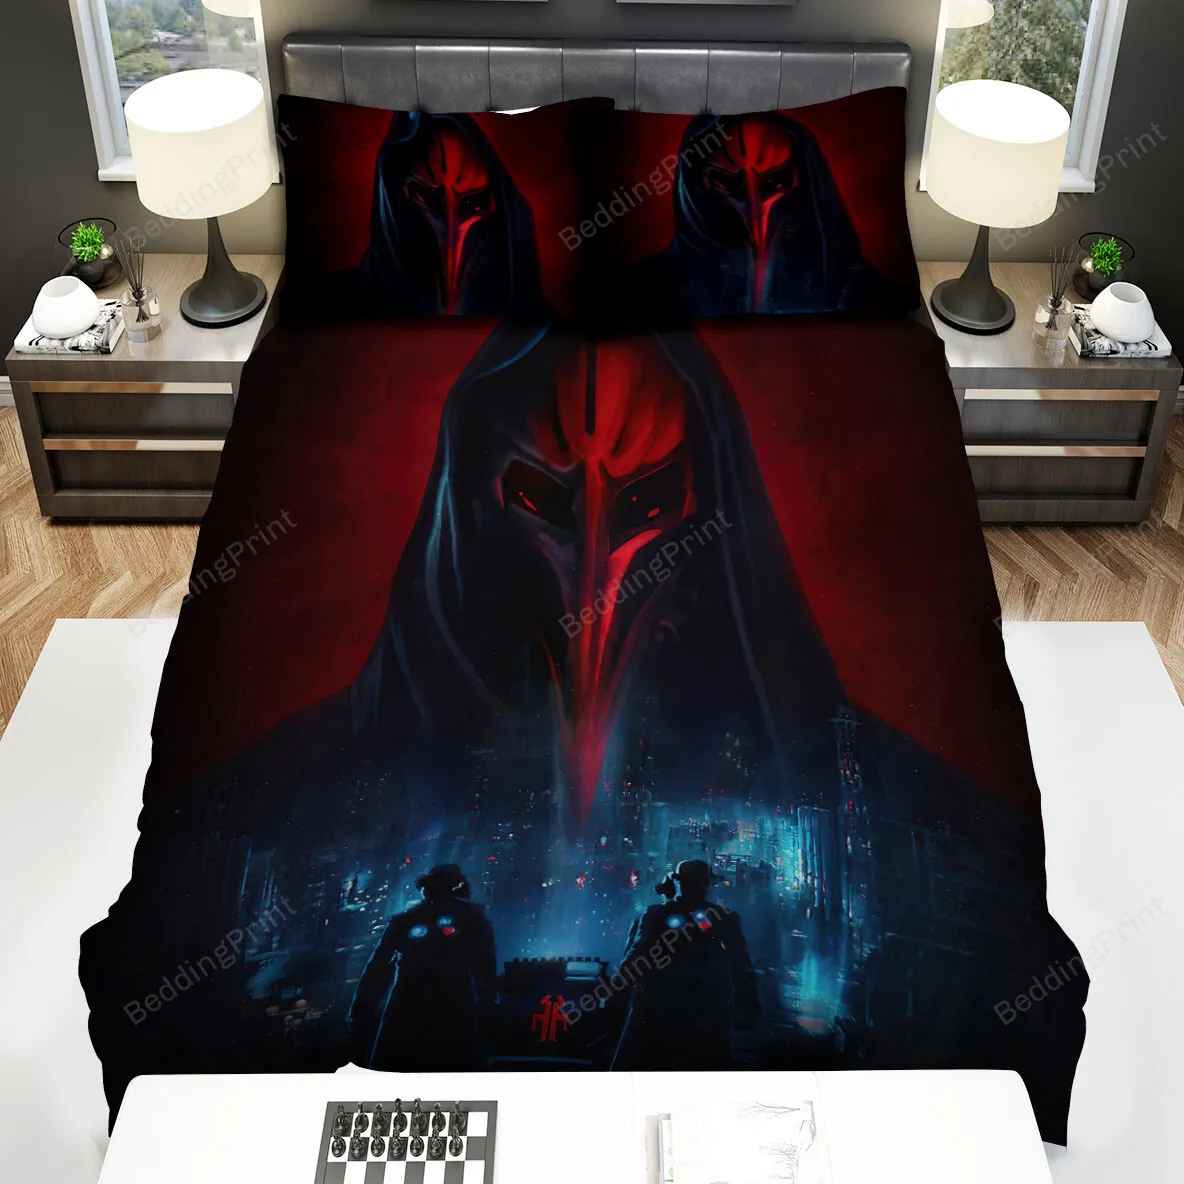 12 Monkeys (20152018) Witness The Complete Season In One Weekend Movie Poster Bed Sheets Spread Comforter Duvet Cover Bedding Sets